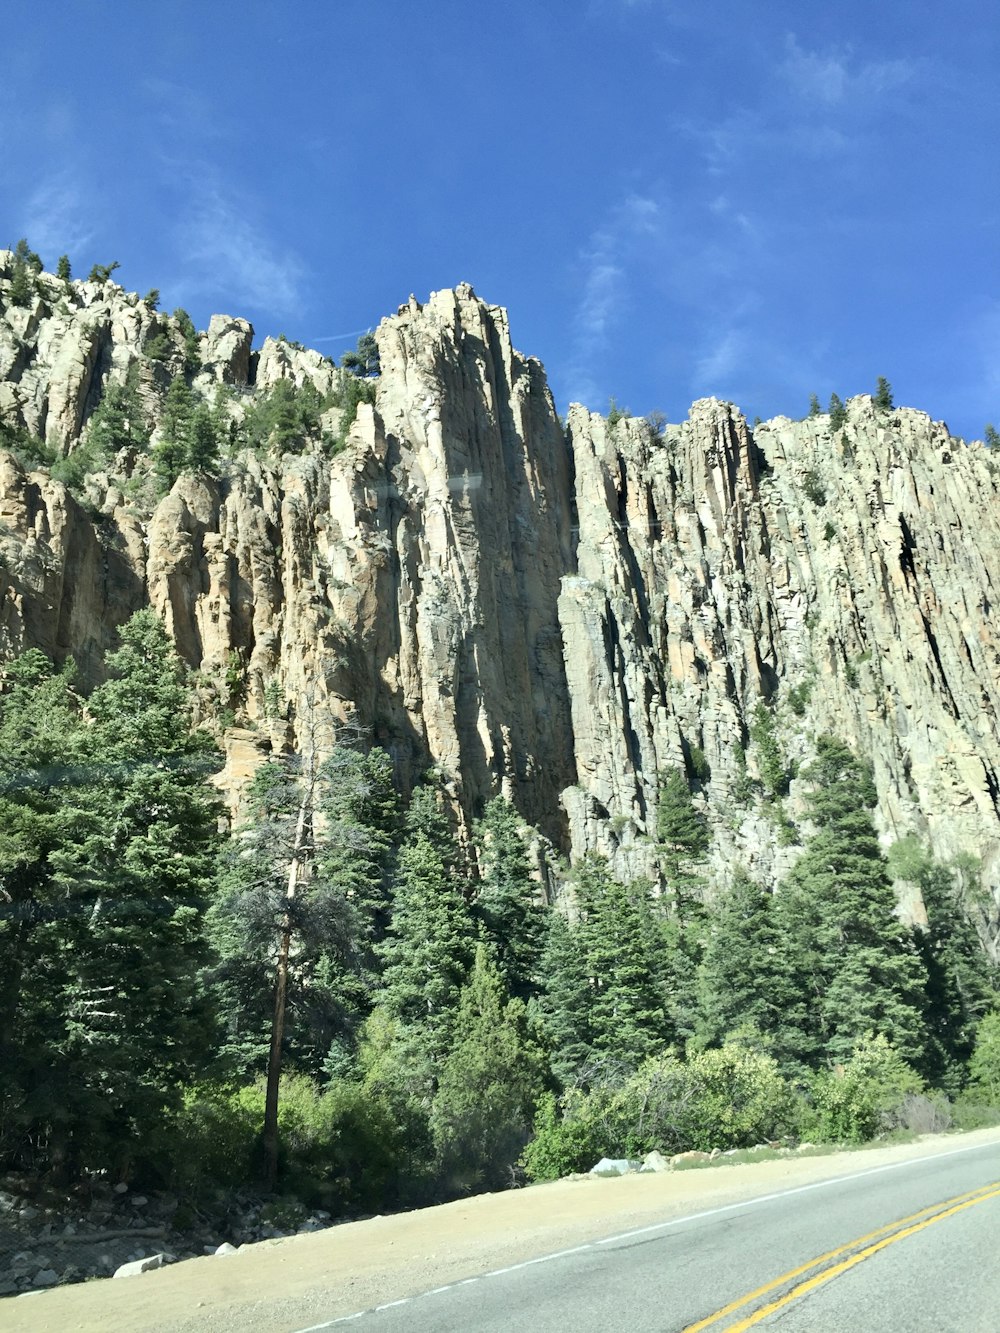 green trees near brown rocky mountain under blue sky during daytime